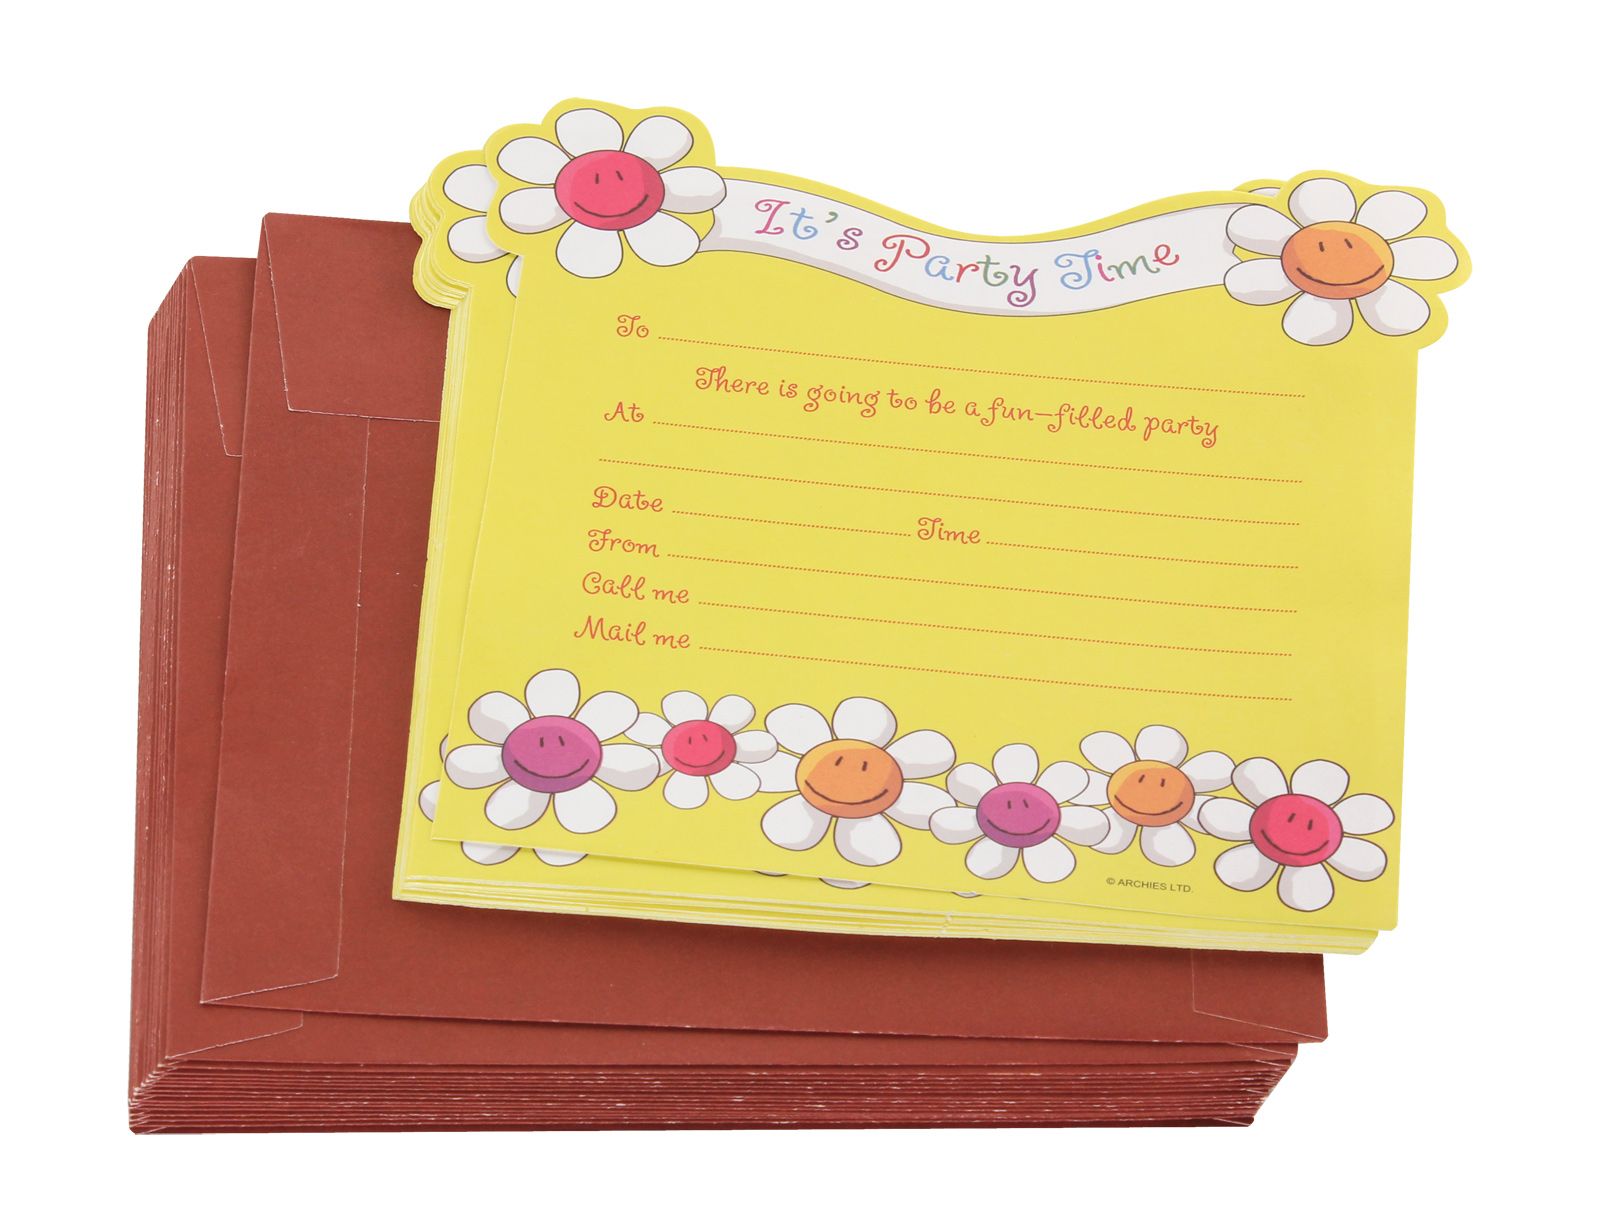 Archies Party Invitation Cards - Its Party Time